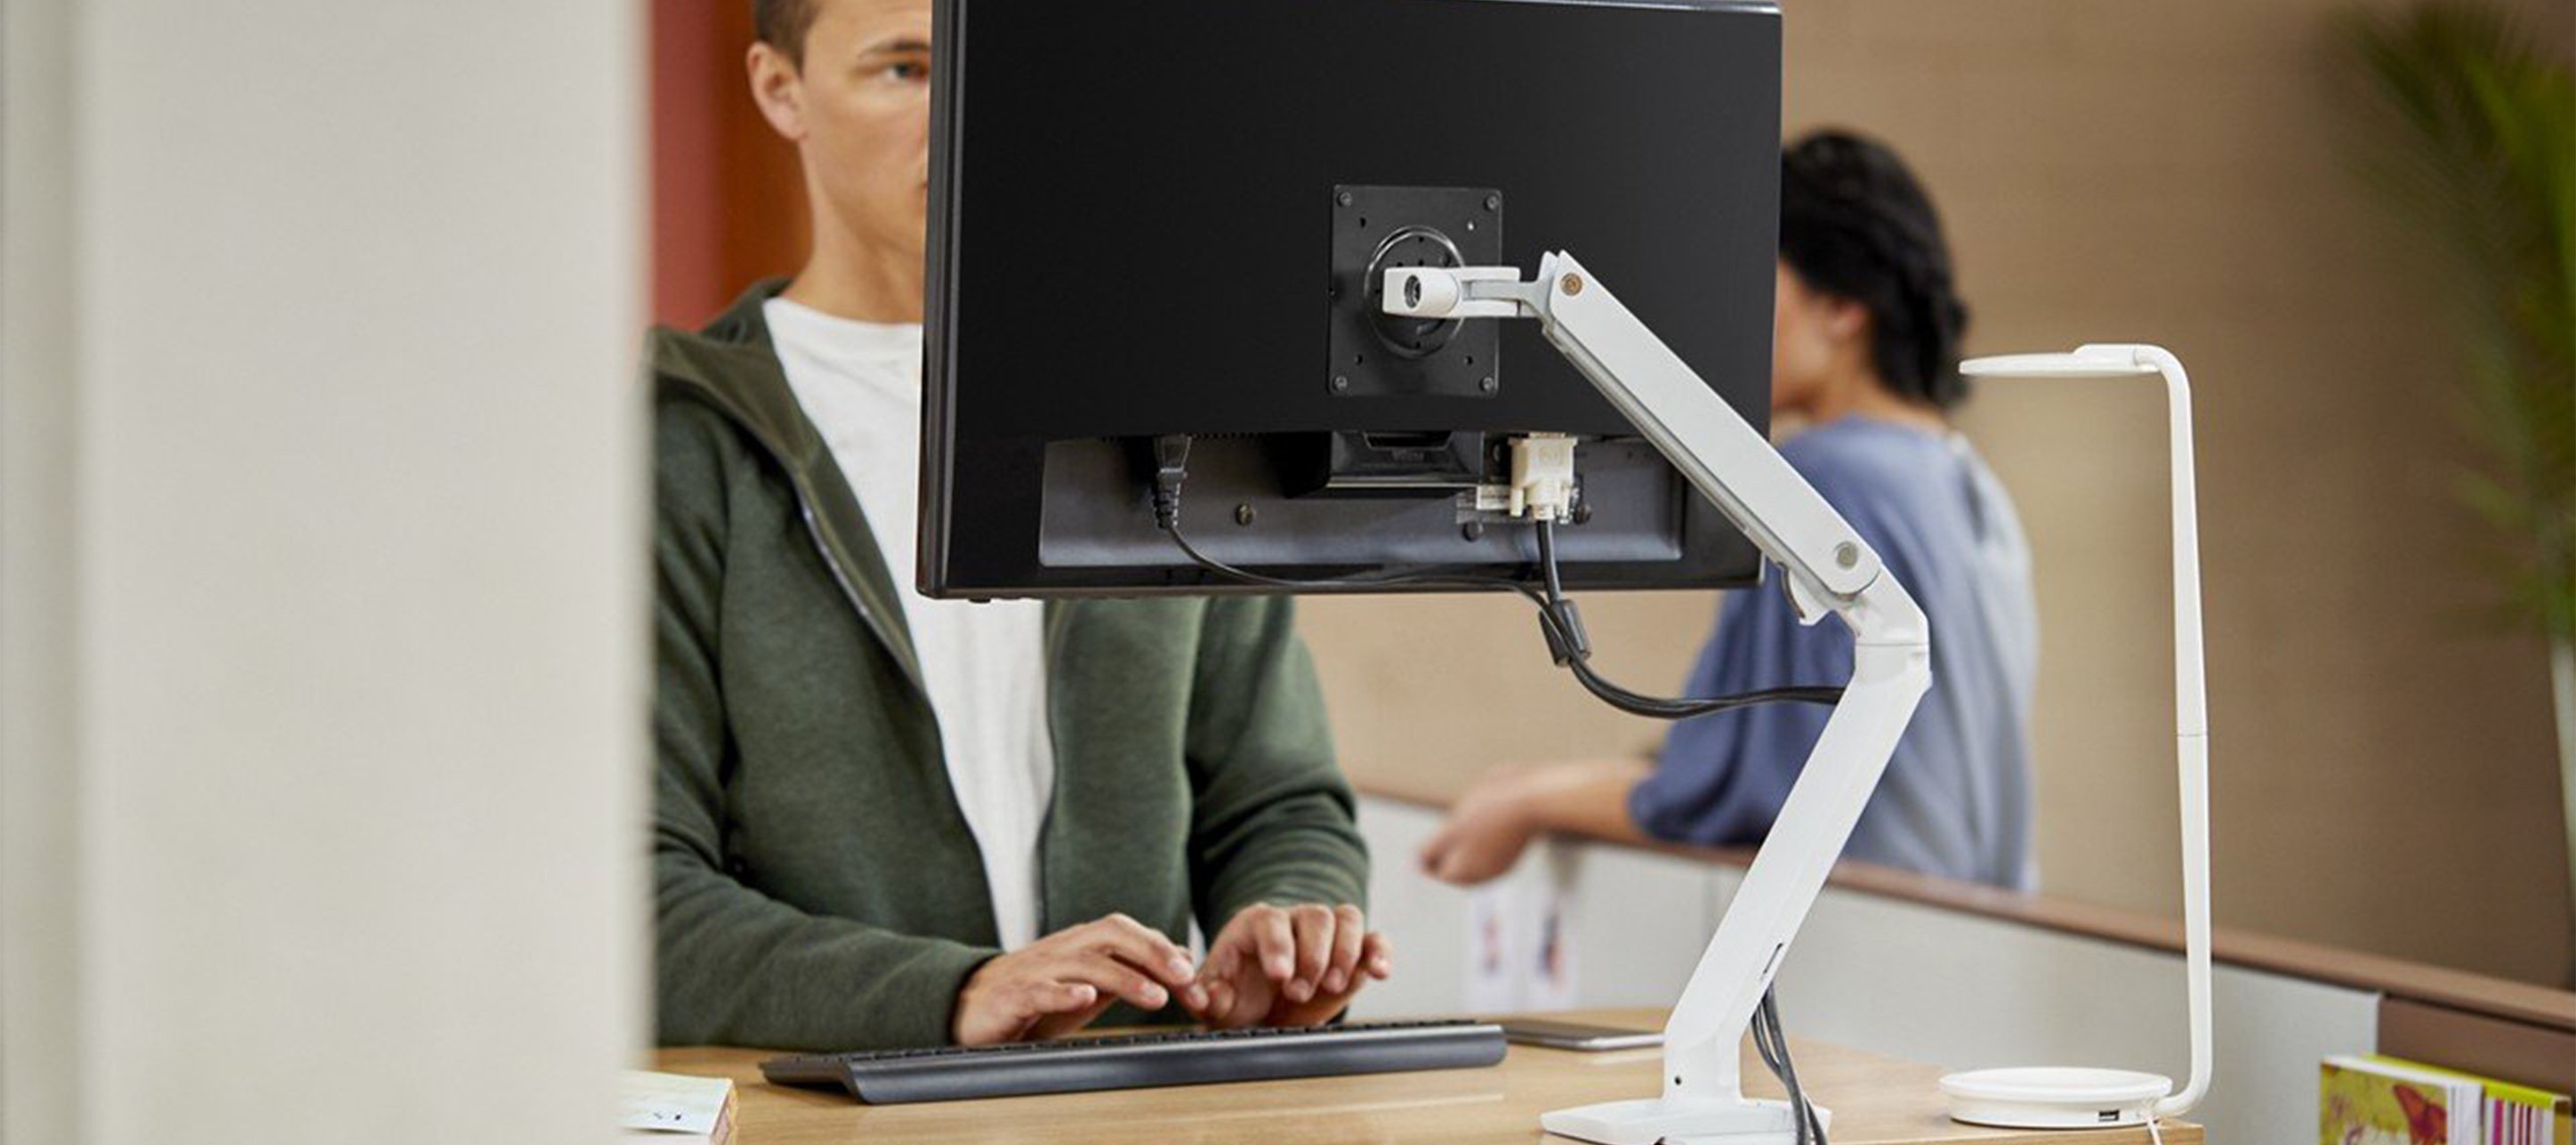 Haworth Ergotron monitor arms attached to a monitor  in an office